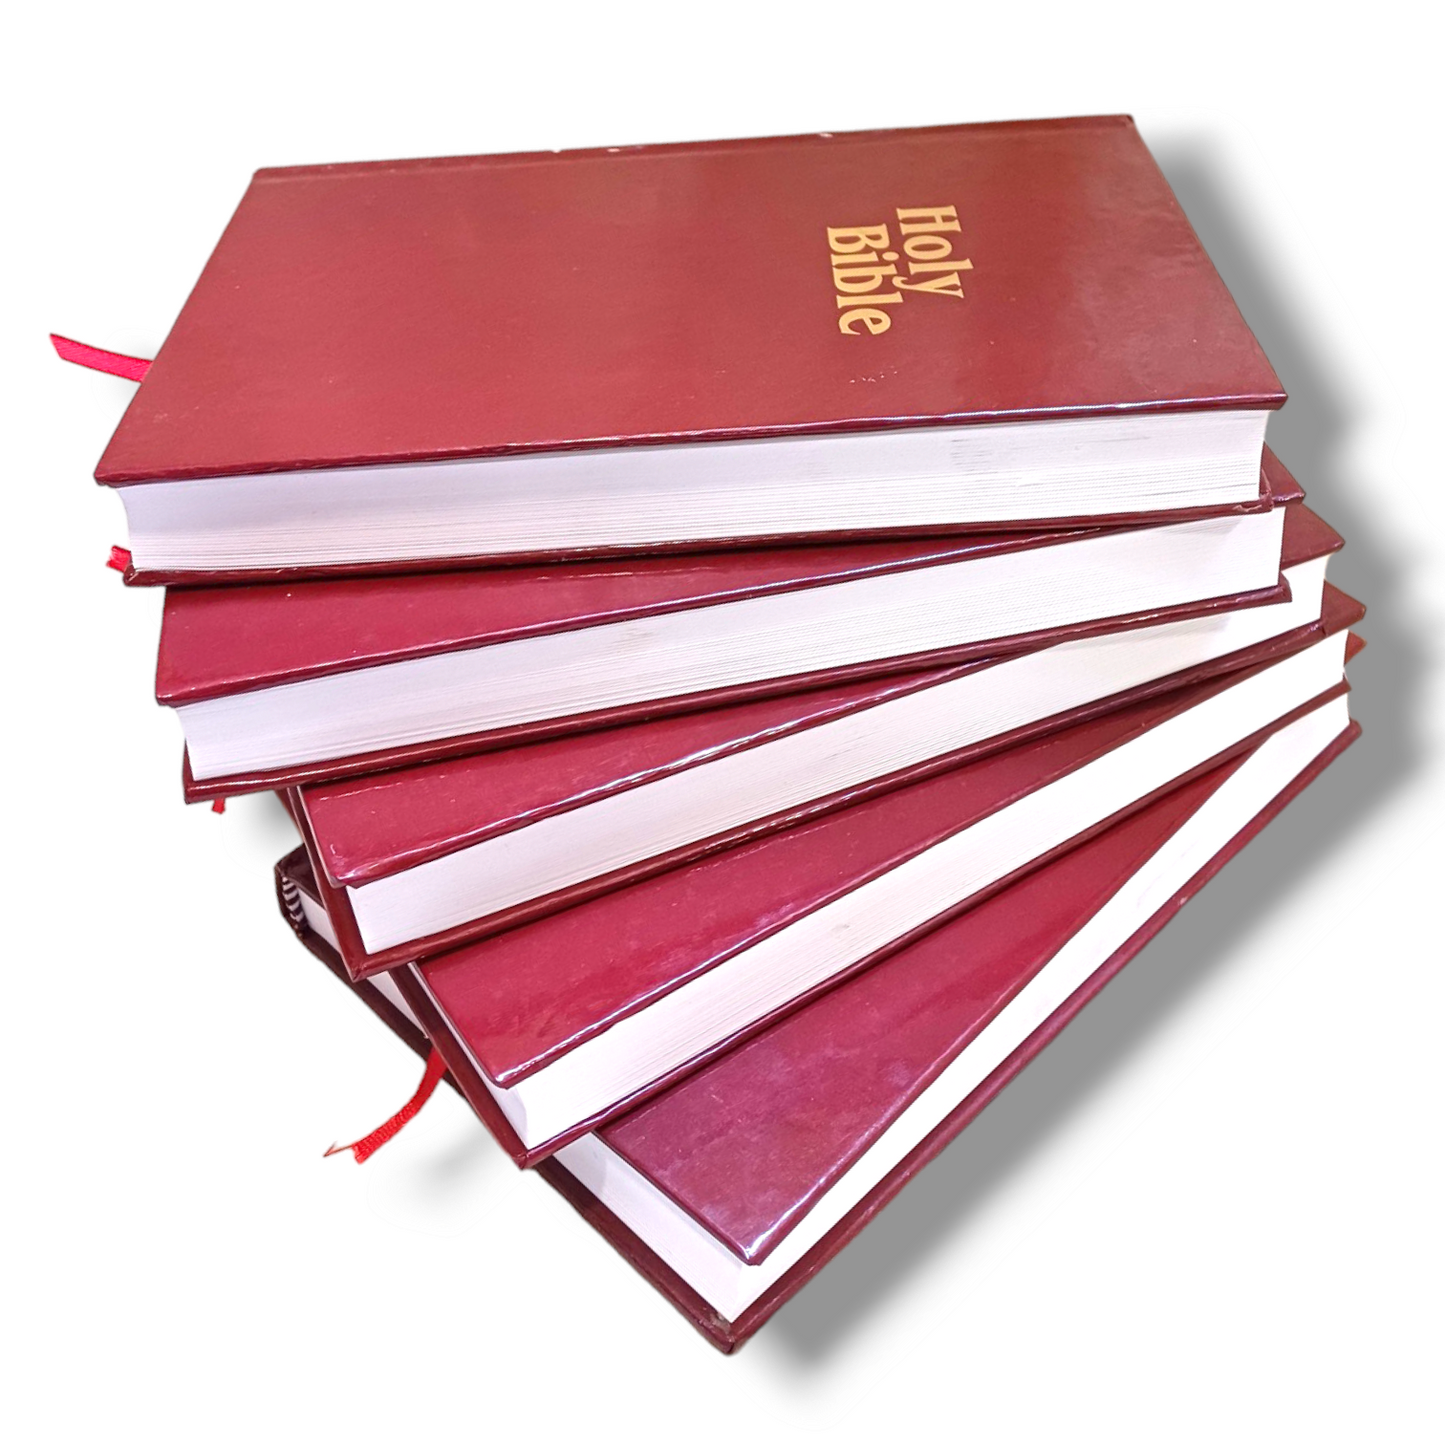 NKJV Holy Bible | Dictionary Concordance Bible | Pack Of Five ( 5 ) Hard Bound Edition | In Red Color Bound | New Edition